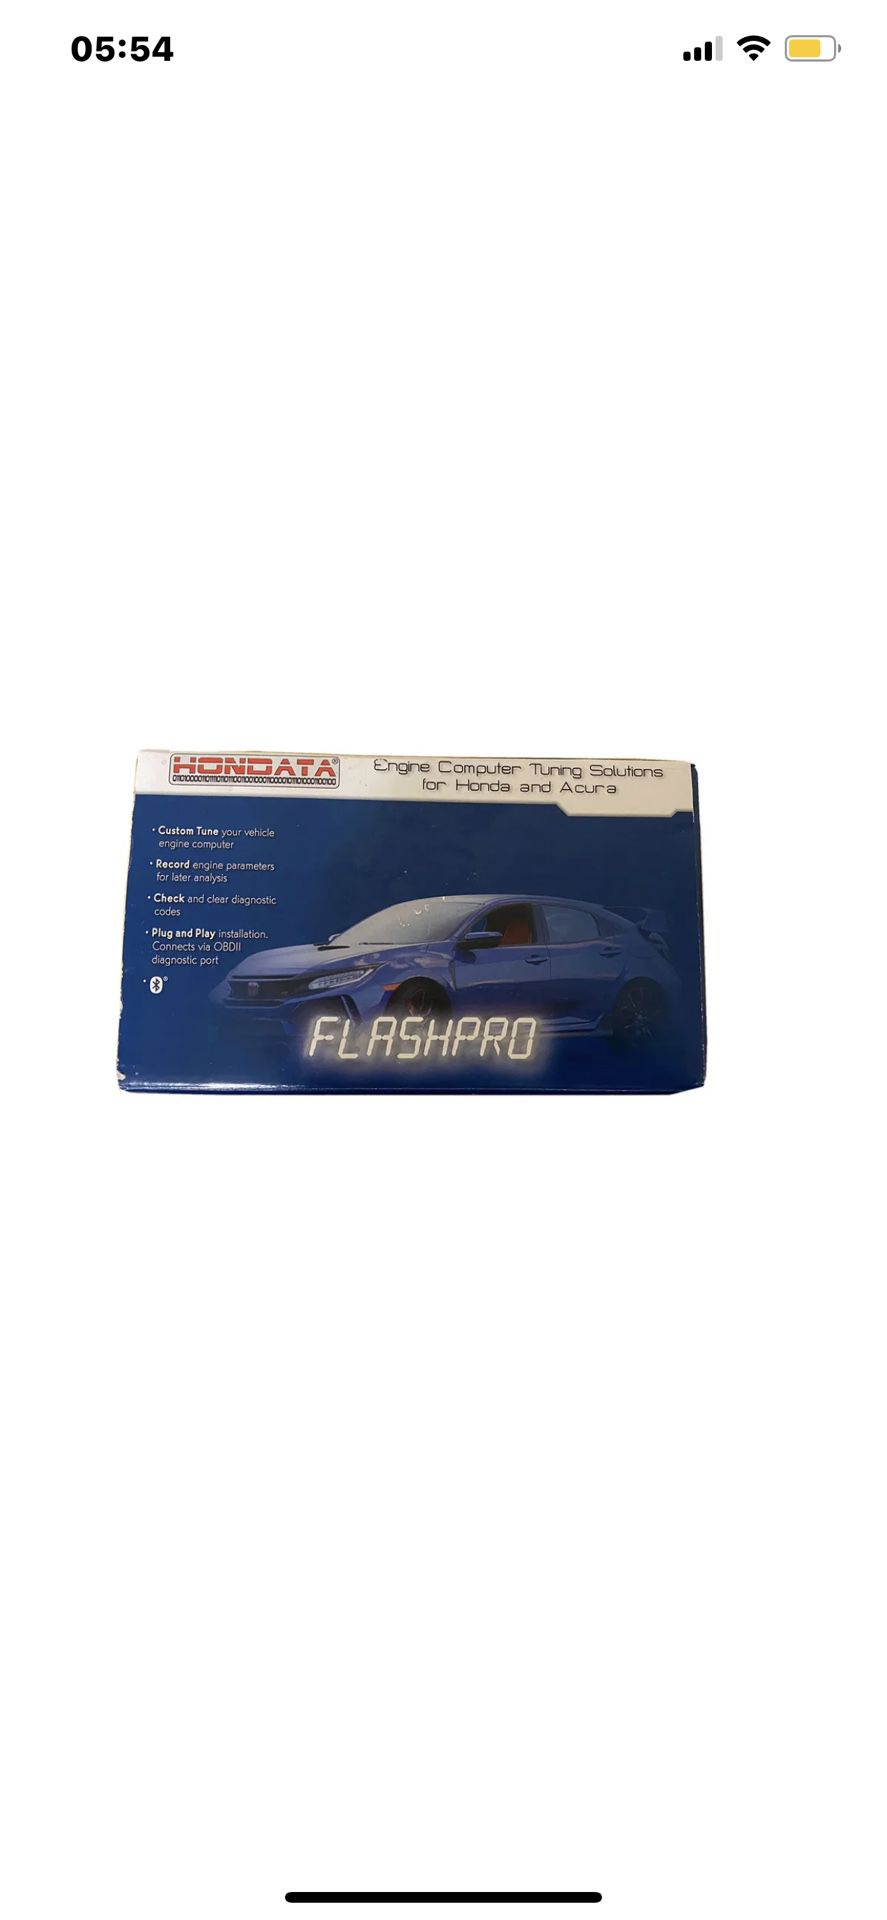 HONDATA FLASHPRO BRAND NEW  Nvr Used Was Wrong Part For My Car